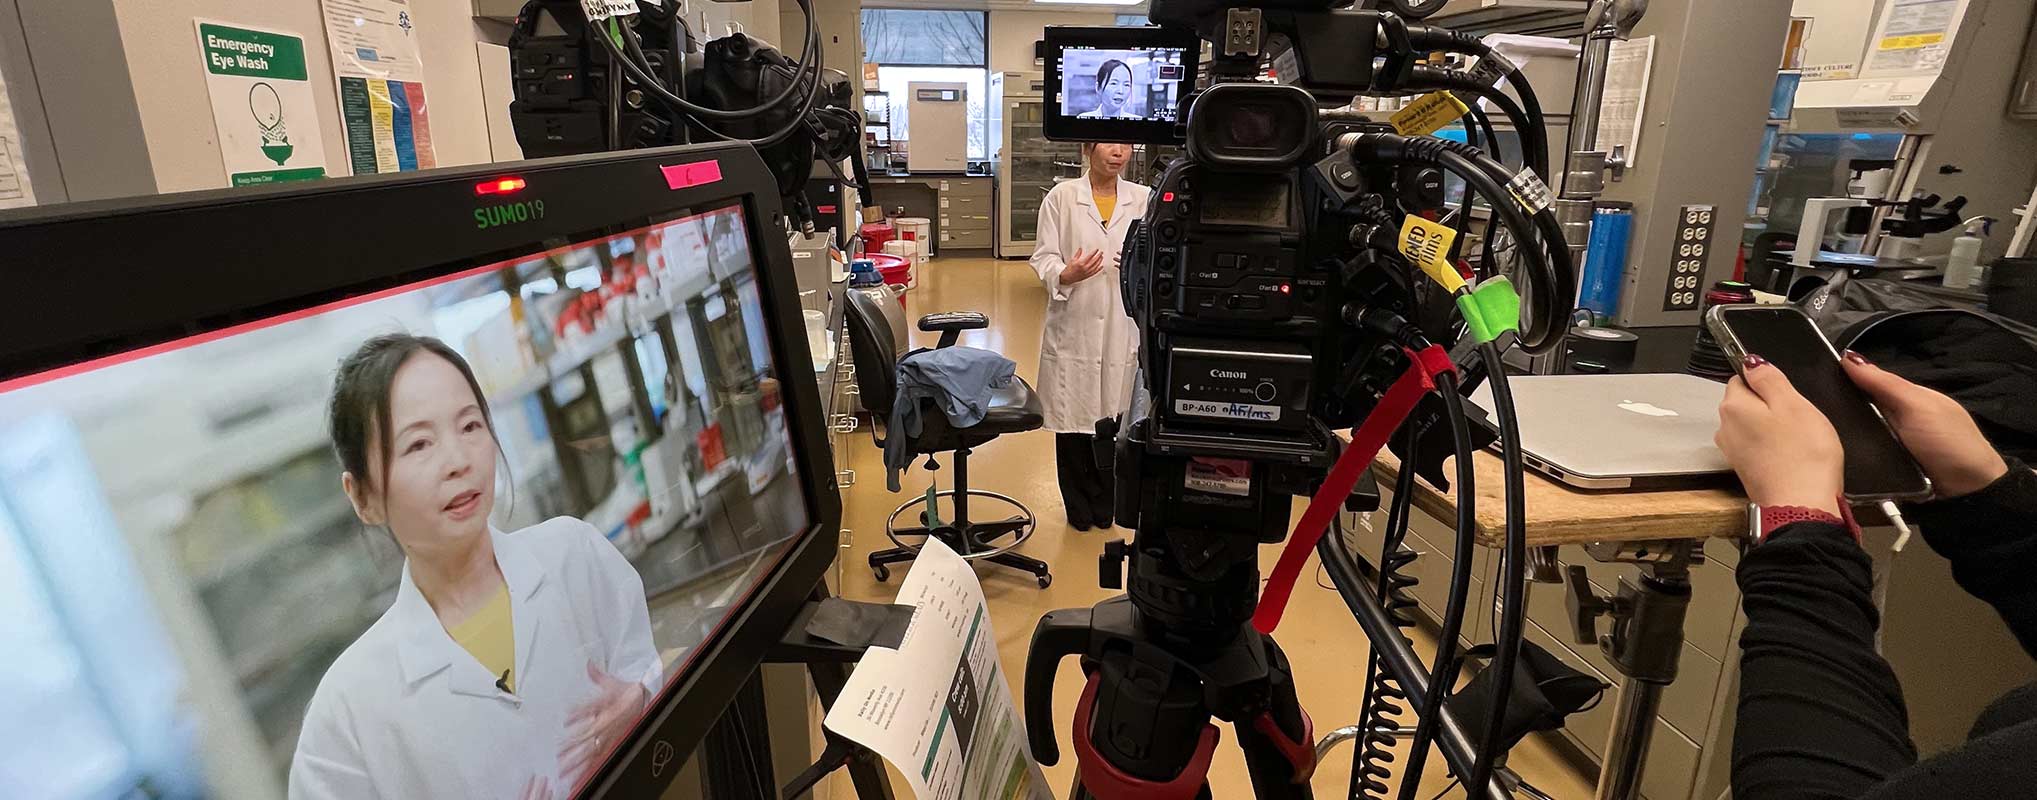 A corporate video production is taking place in a lab with cameras and a monitor